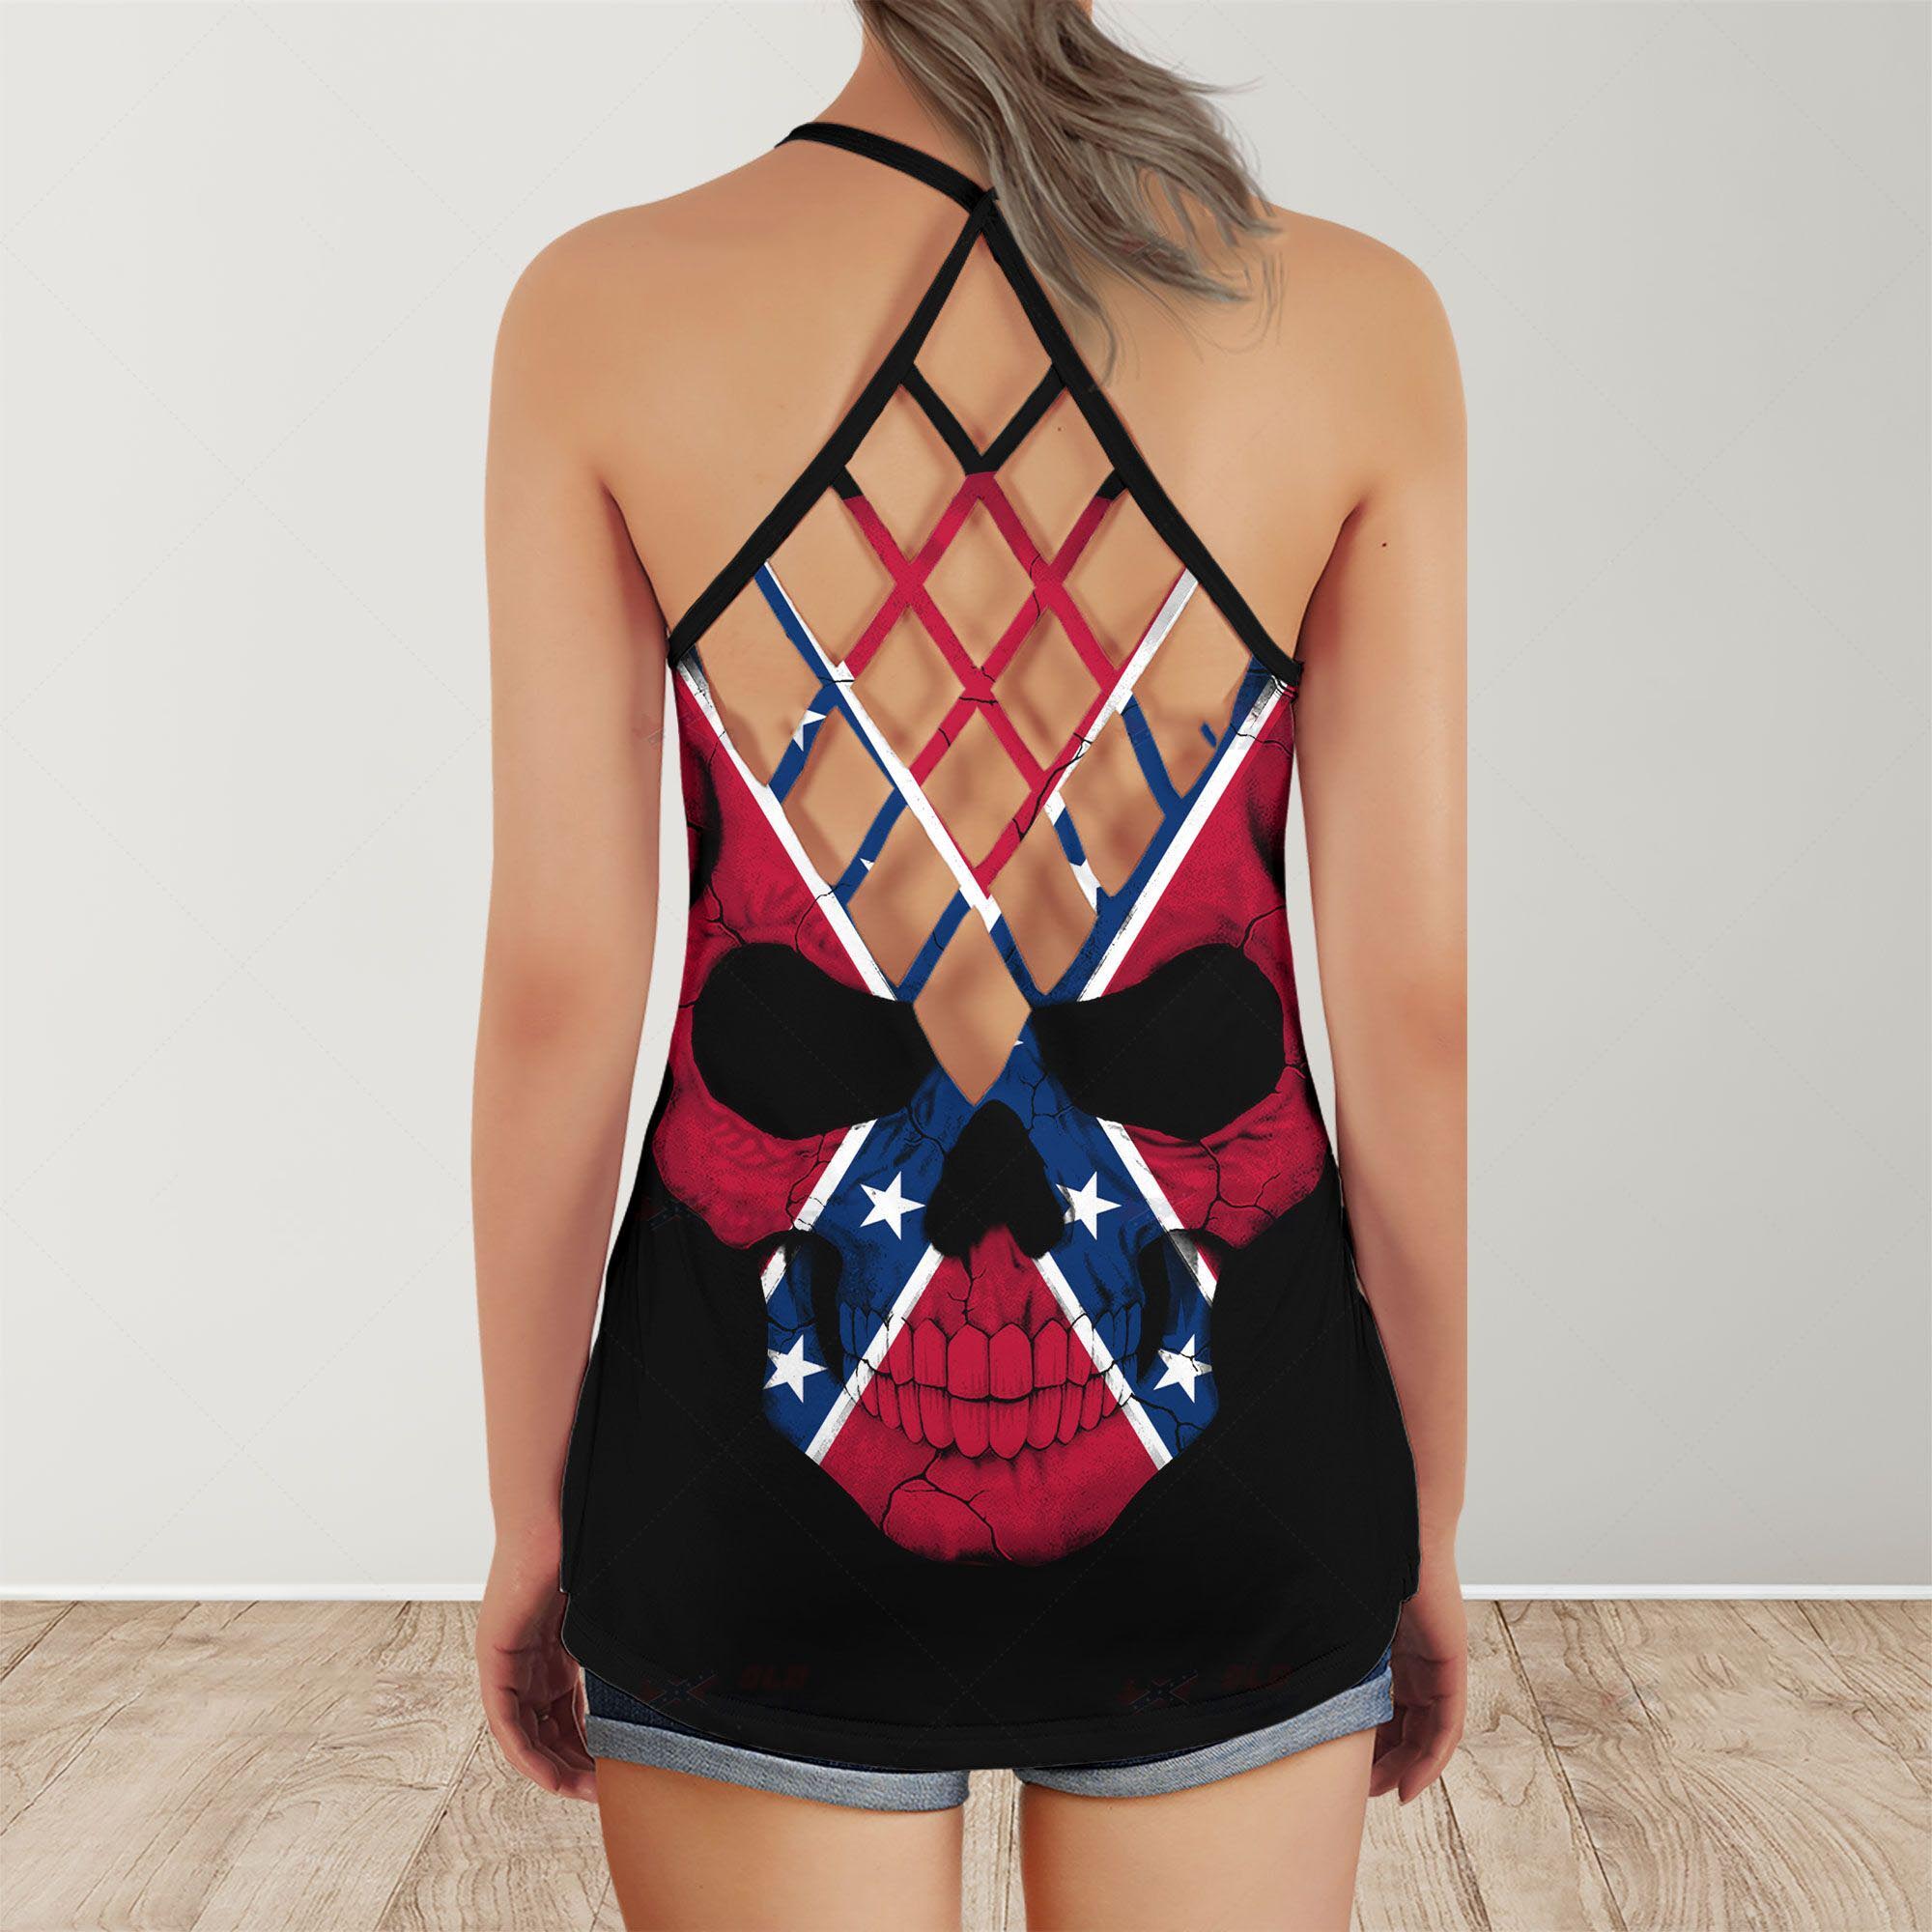 Southern Confederate Flag Skull Rebel till the day I die criss cross tank top - Picture 2